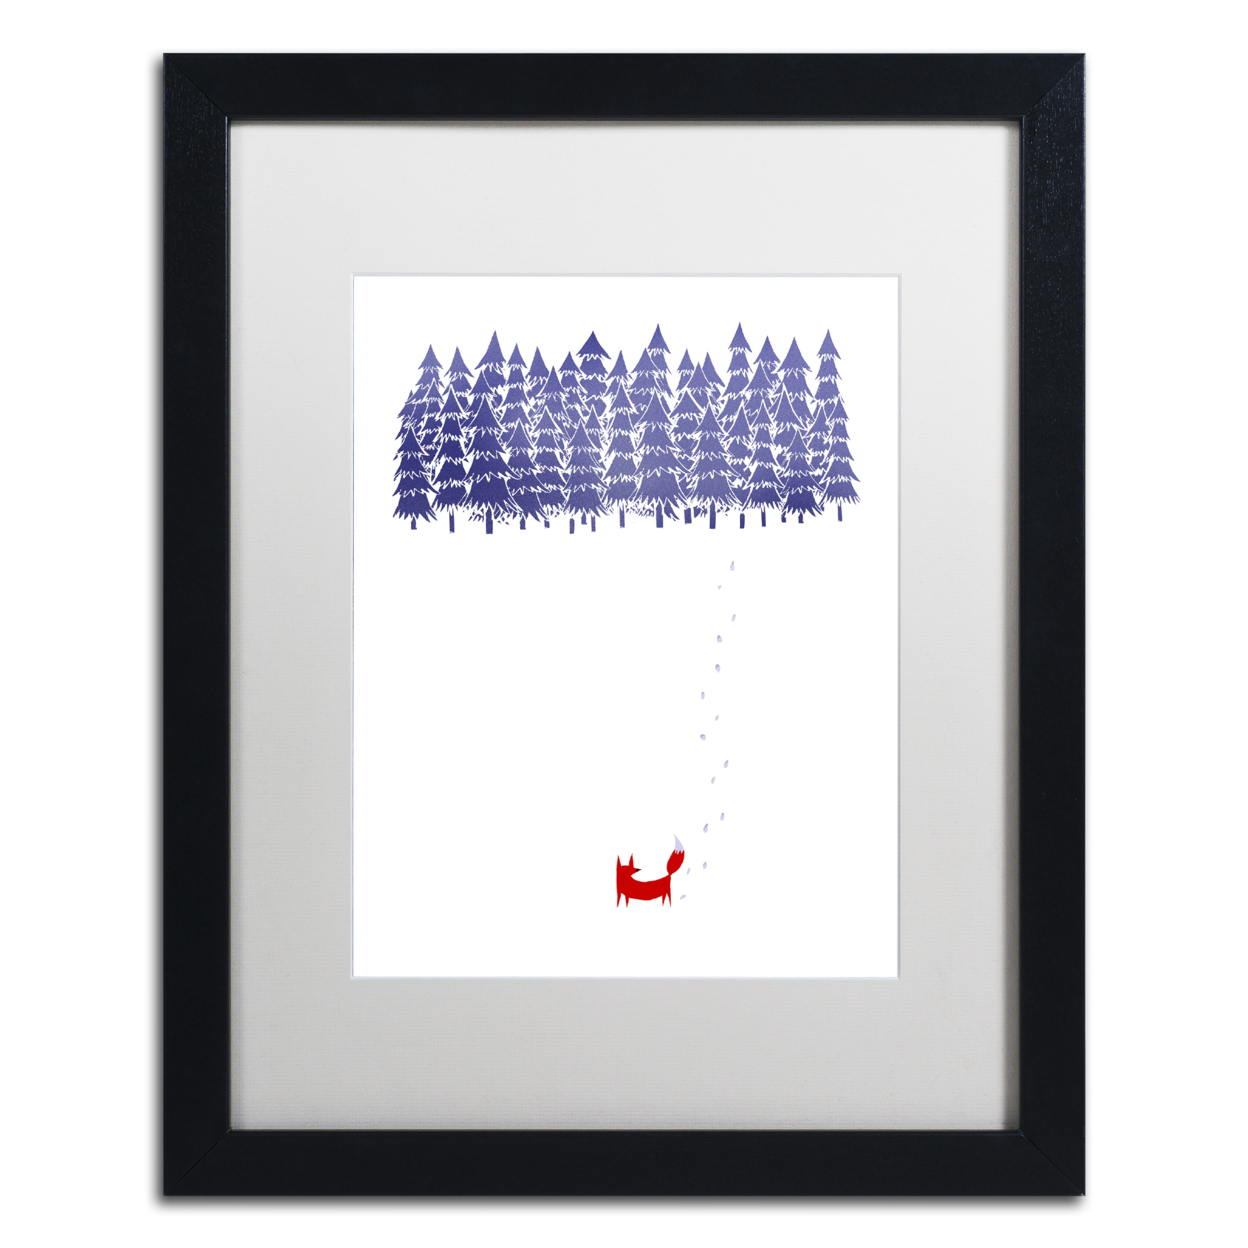 Robert Farkas 'Alone In The Forest' Black Wooden Framed Art 18 X 22 Inches